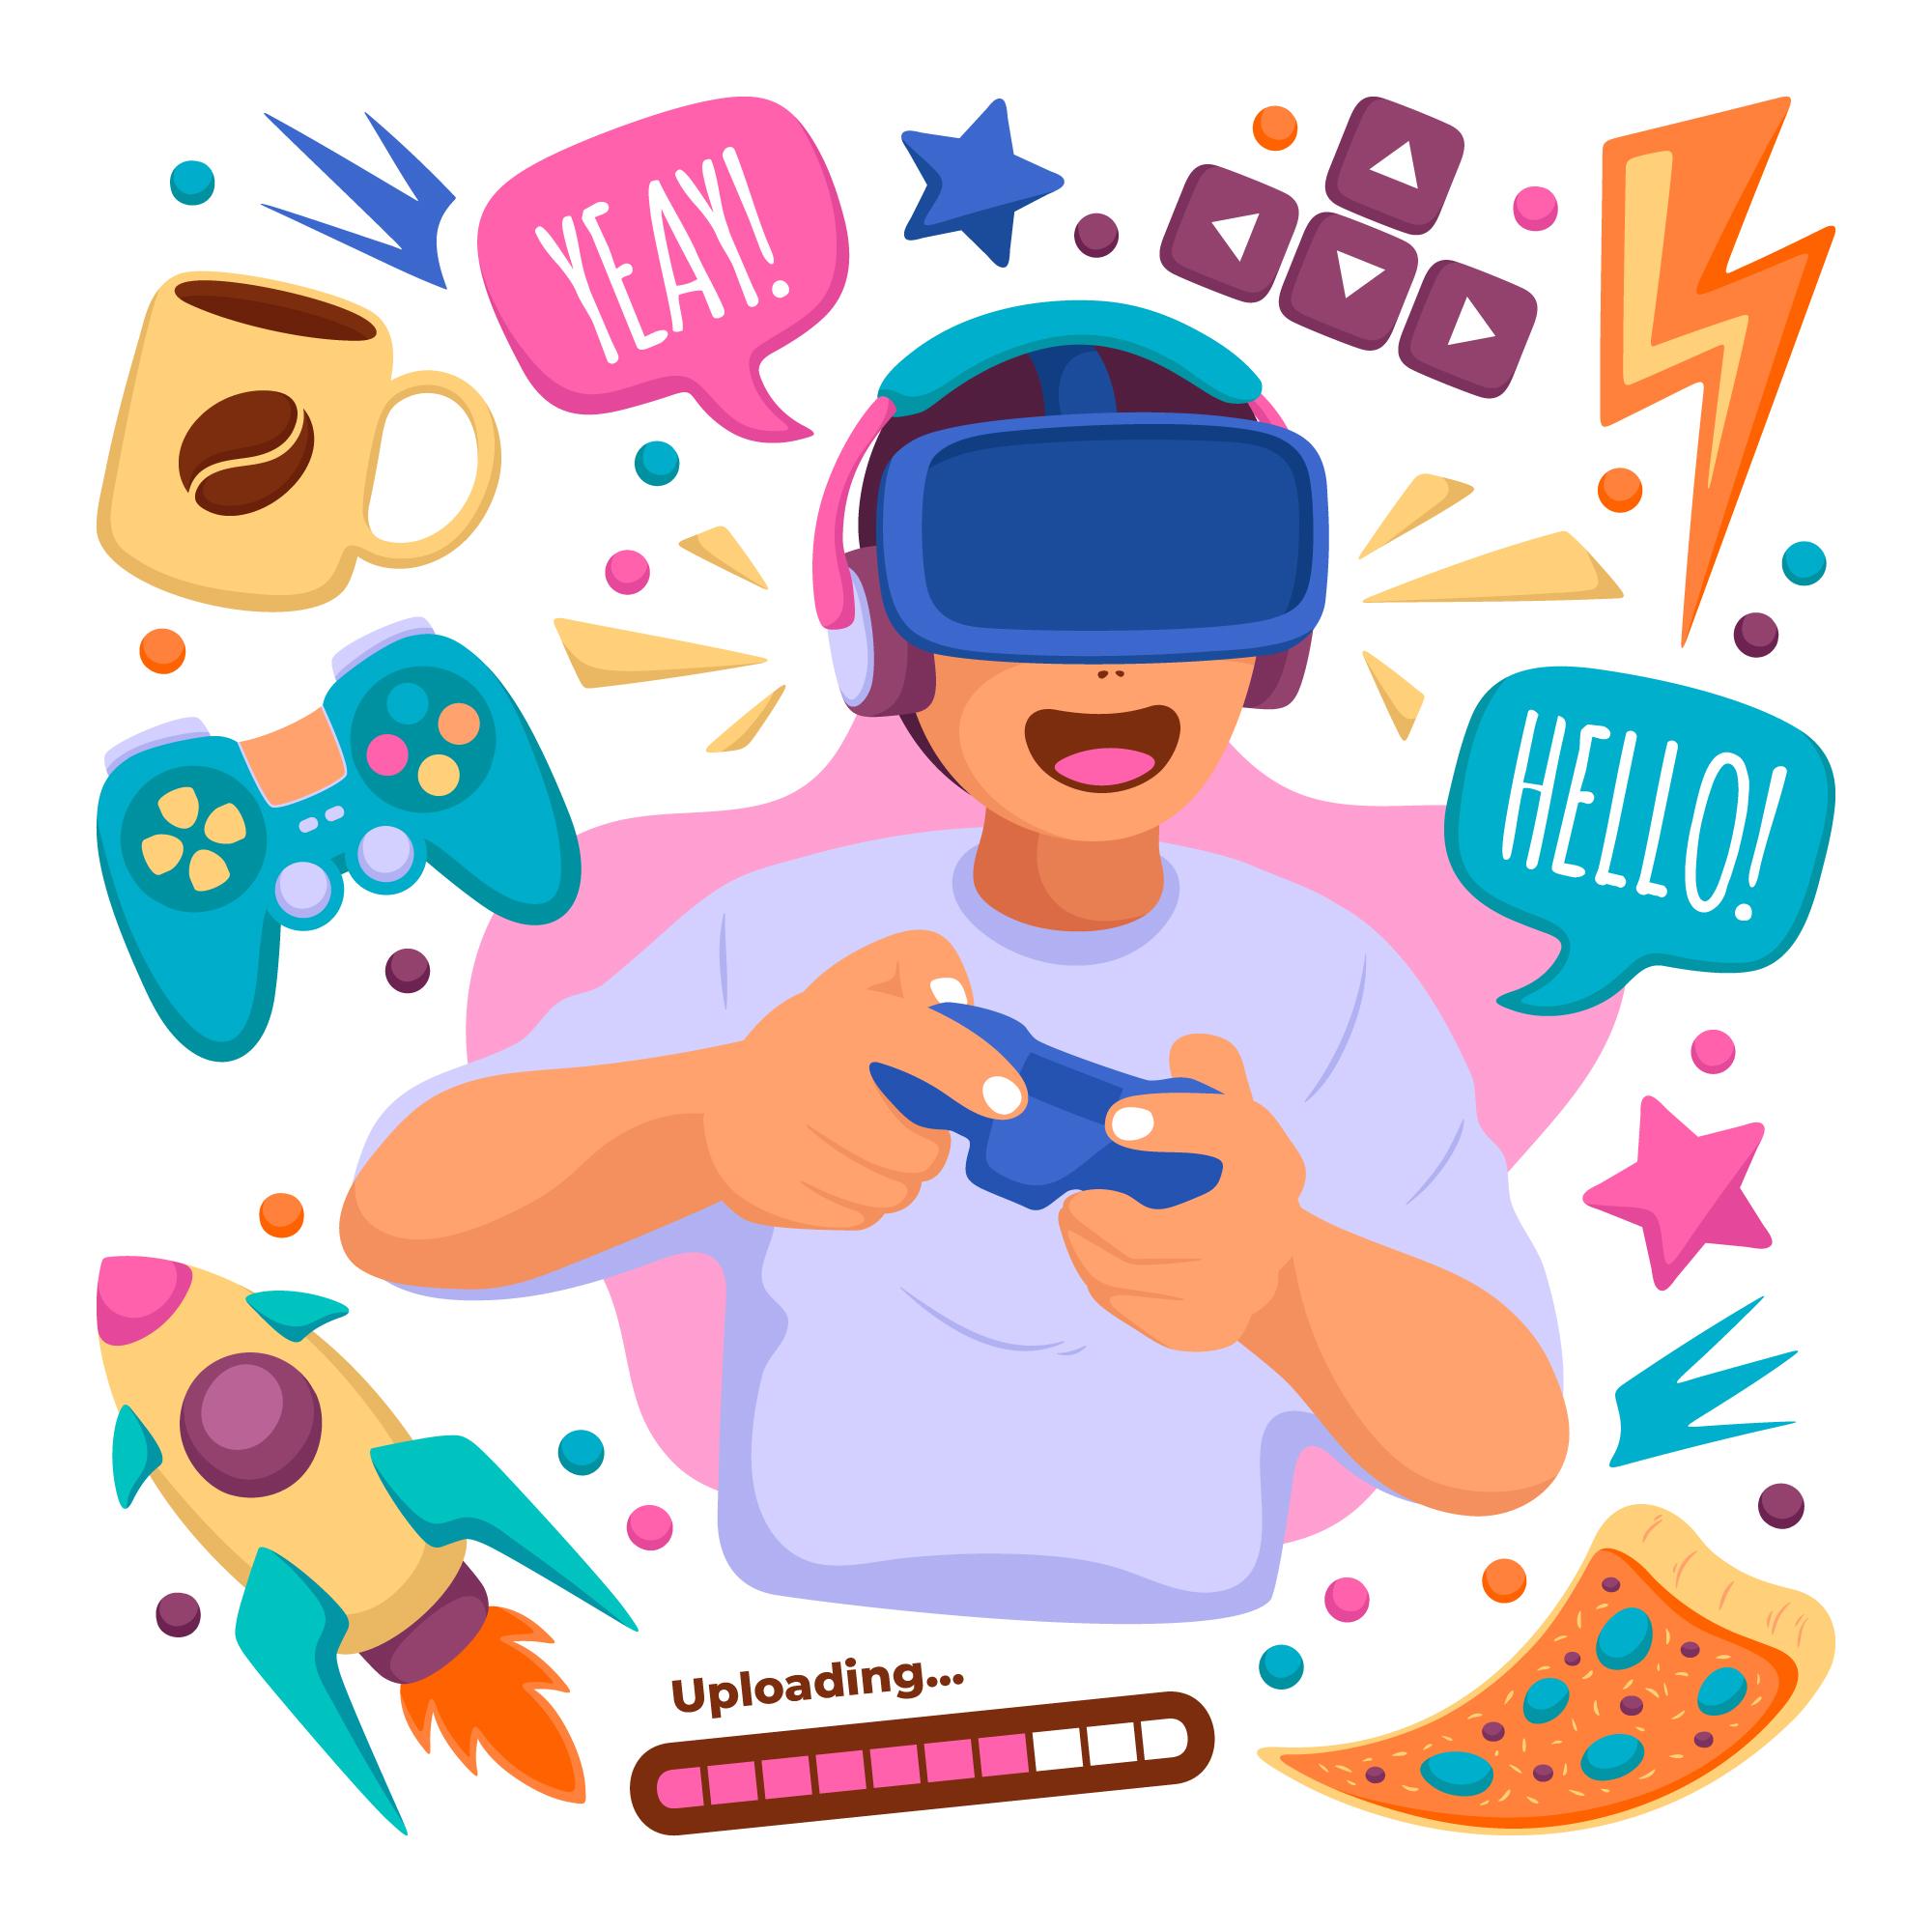 Illustrated image of a person holding a video game controller with a VR headset on their face. They are surrounded by images of game controllers, pizza, coffee, and spaceships.